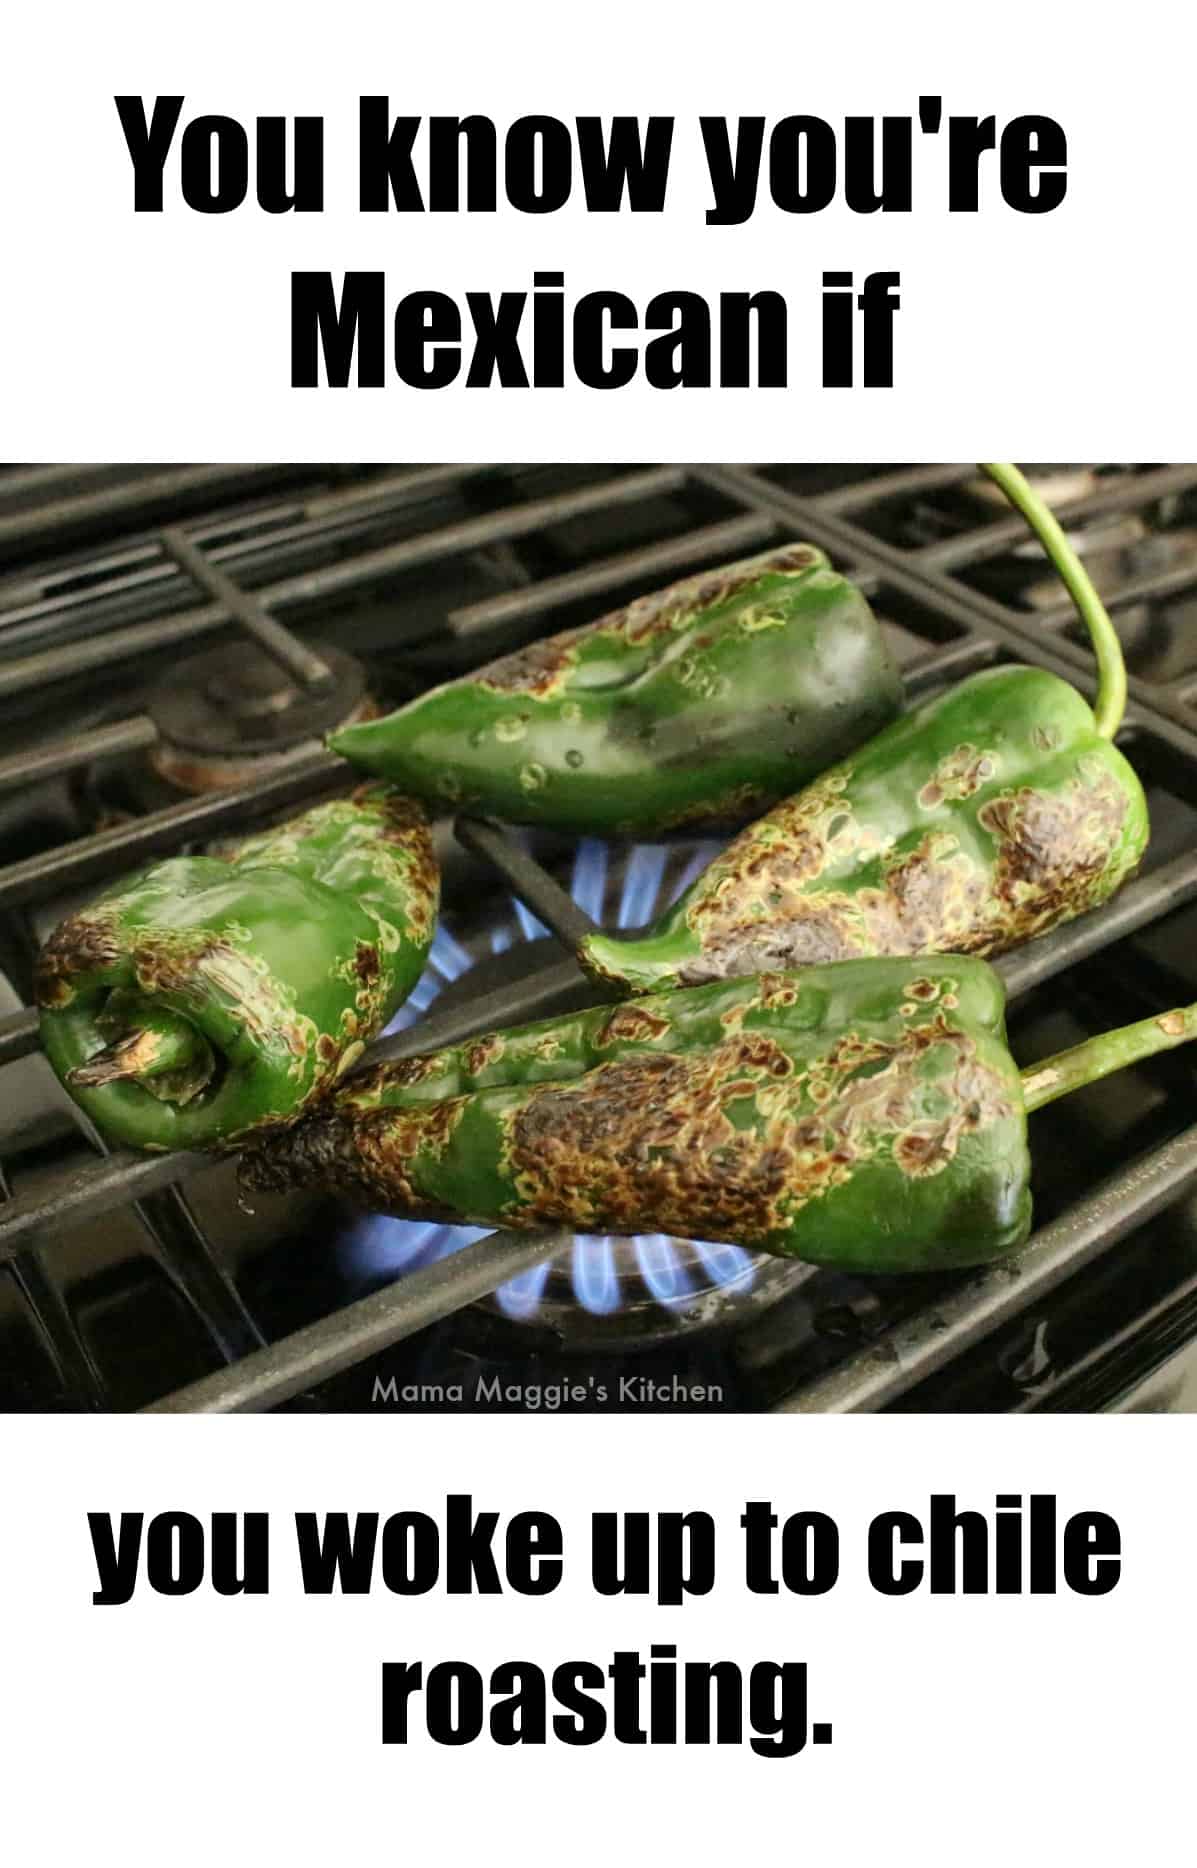 A picture of poblanos roasting on a gas stove.